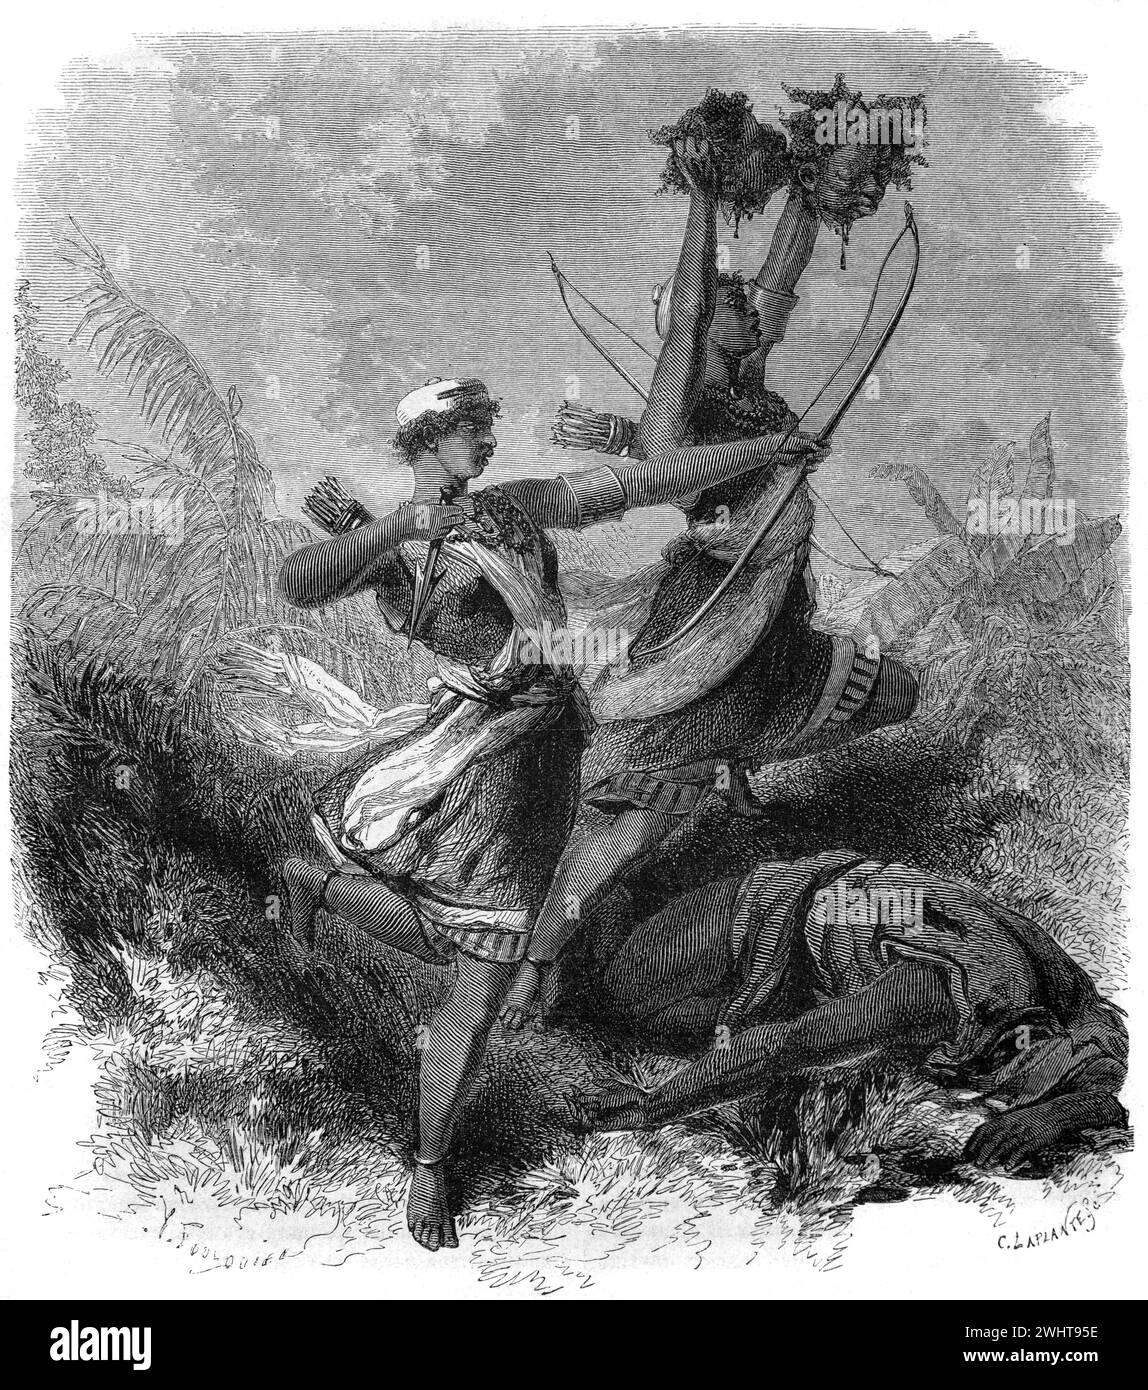 Amazon Archers or Warriors Beheading Tribal Enemies in the Kingdom of Dahomey, now Republic of Benin, West Africa. Vintage or Historic Engraving or Illustration 1863 Stock Photo